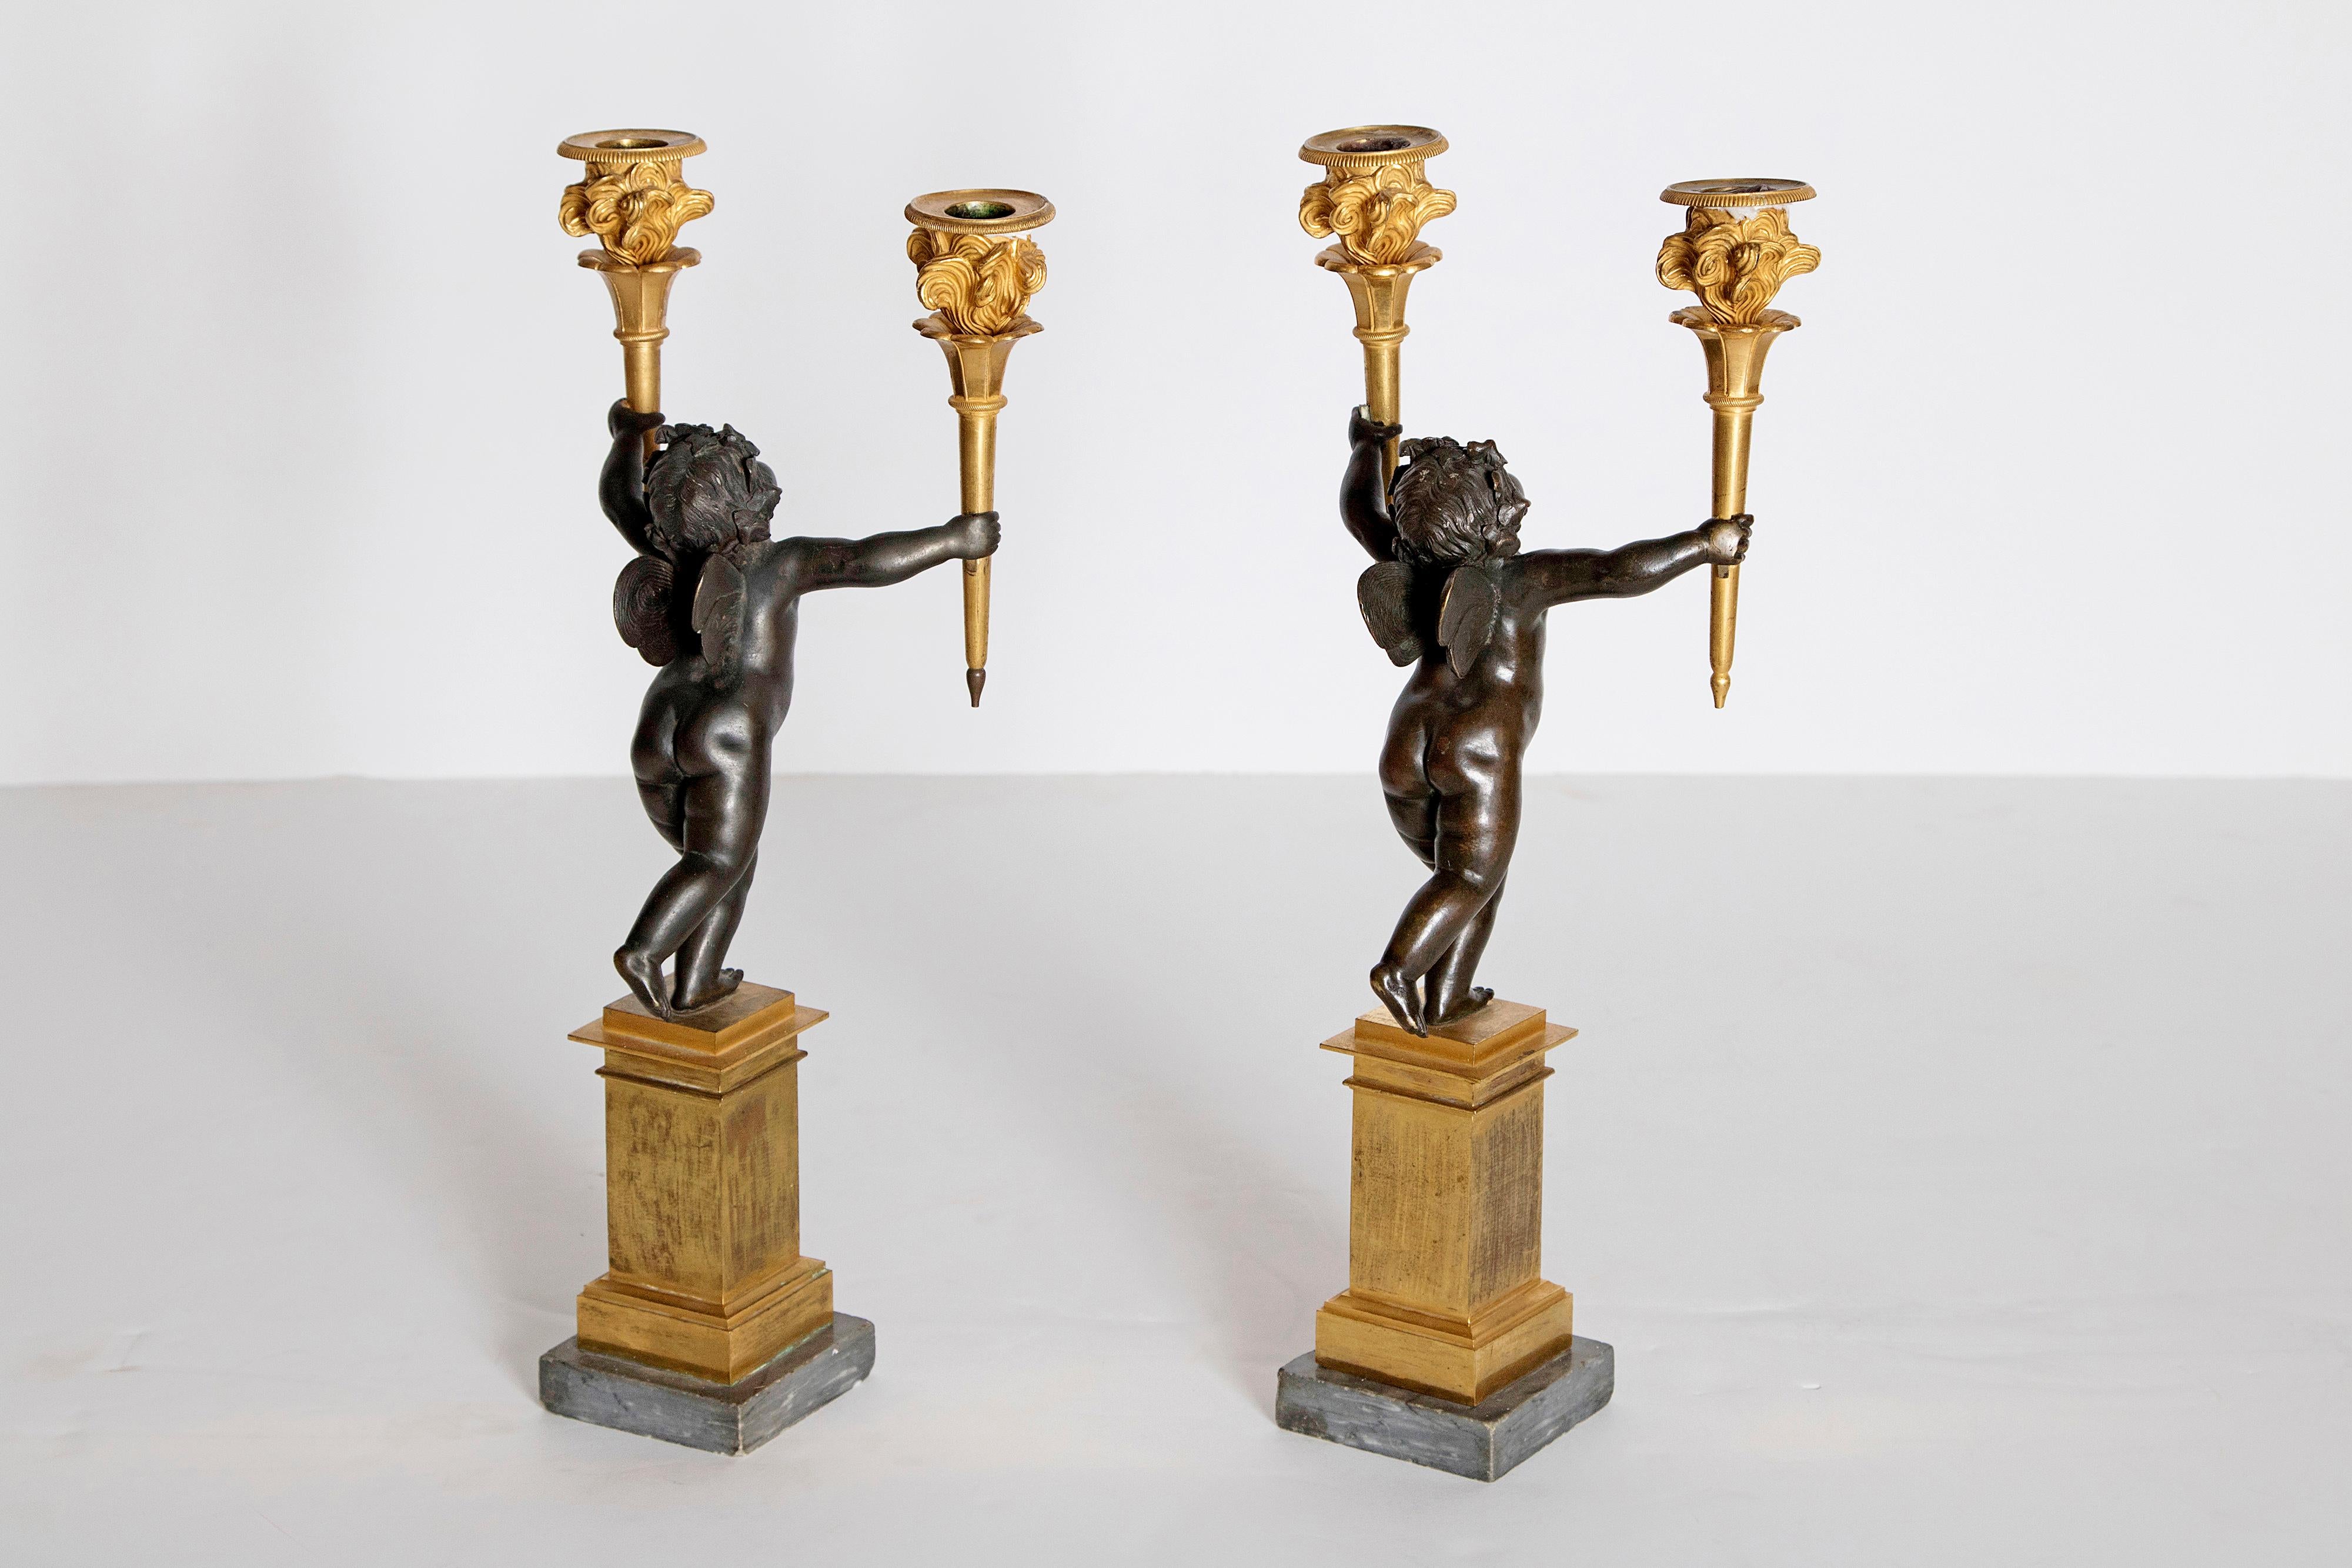 Pair of French Charles X Patinated Bronze and Gilt Figurative Candelabras For Sale 2